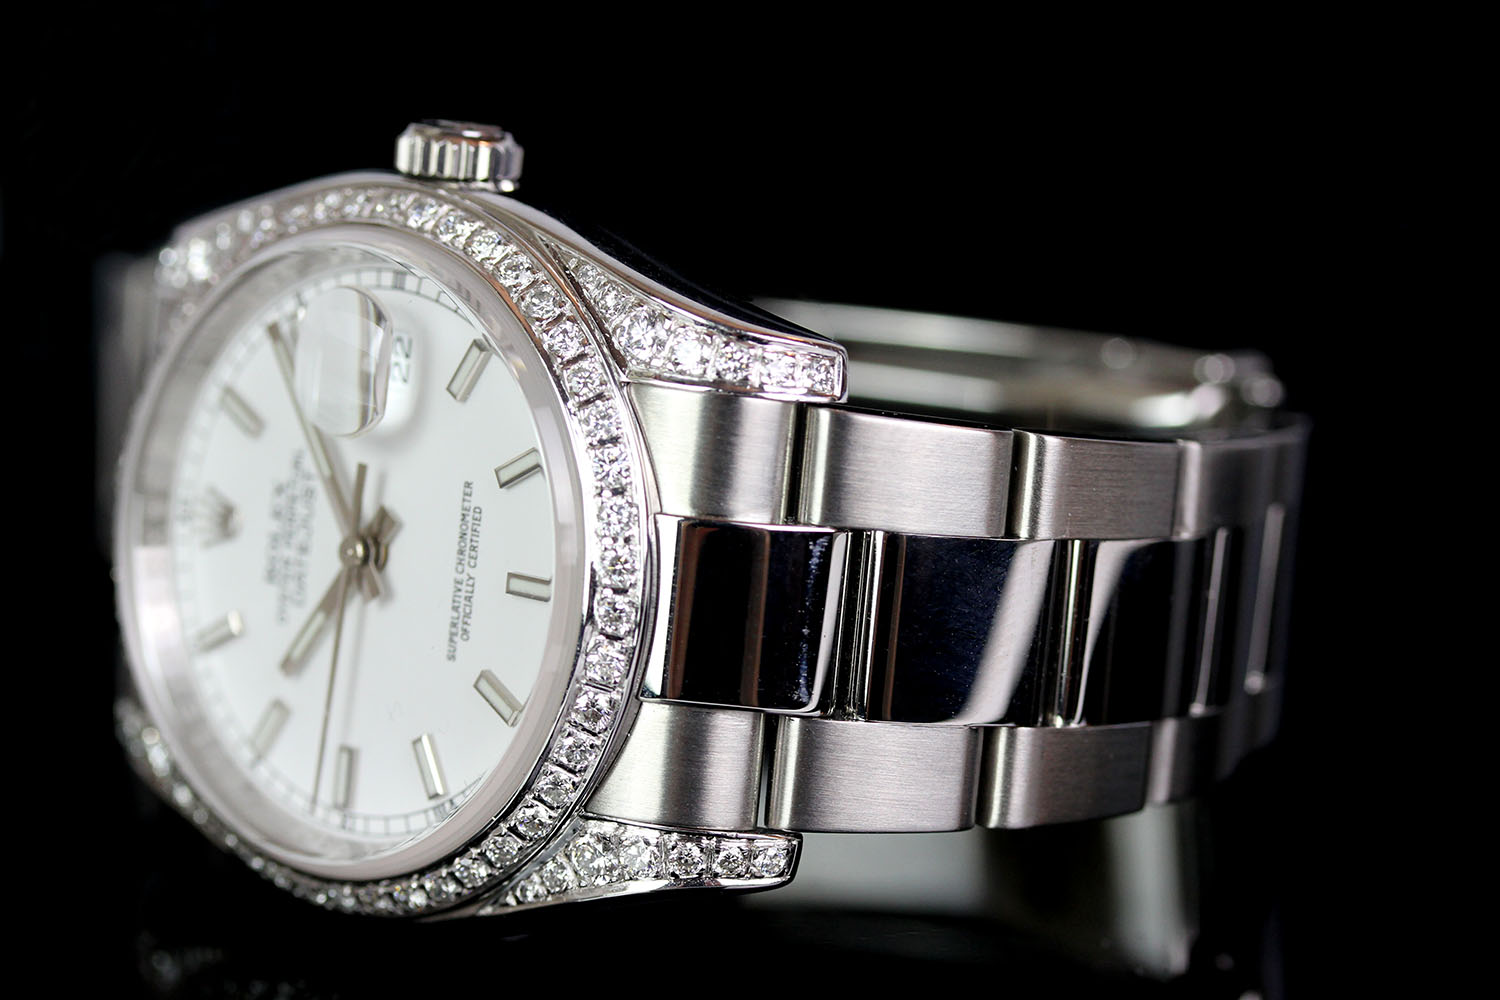 GENTLEMANS ROLEX OYSTER PERPETUAL DATEJUST MODEL 116200, SN M84....,DIAMOND SET BEZEL AND - Image 3 of 5